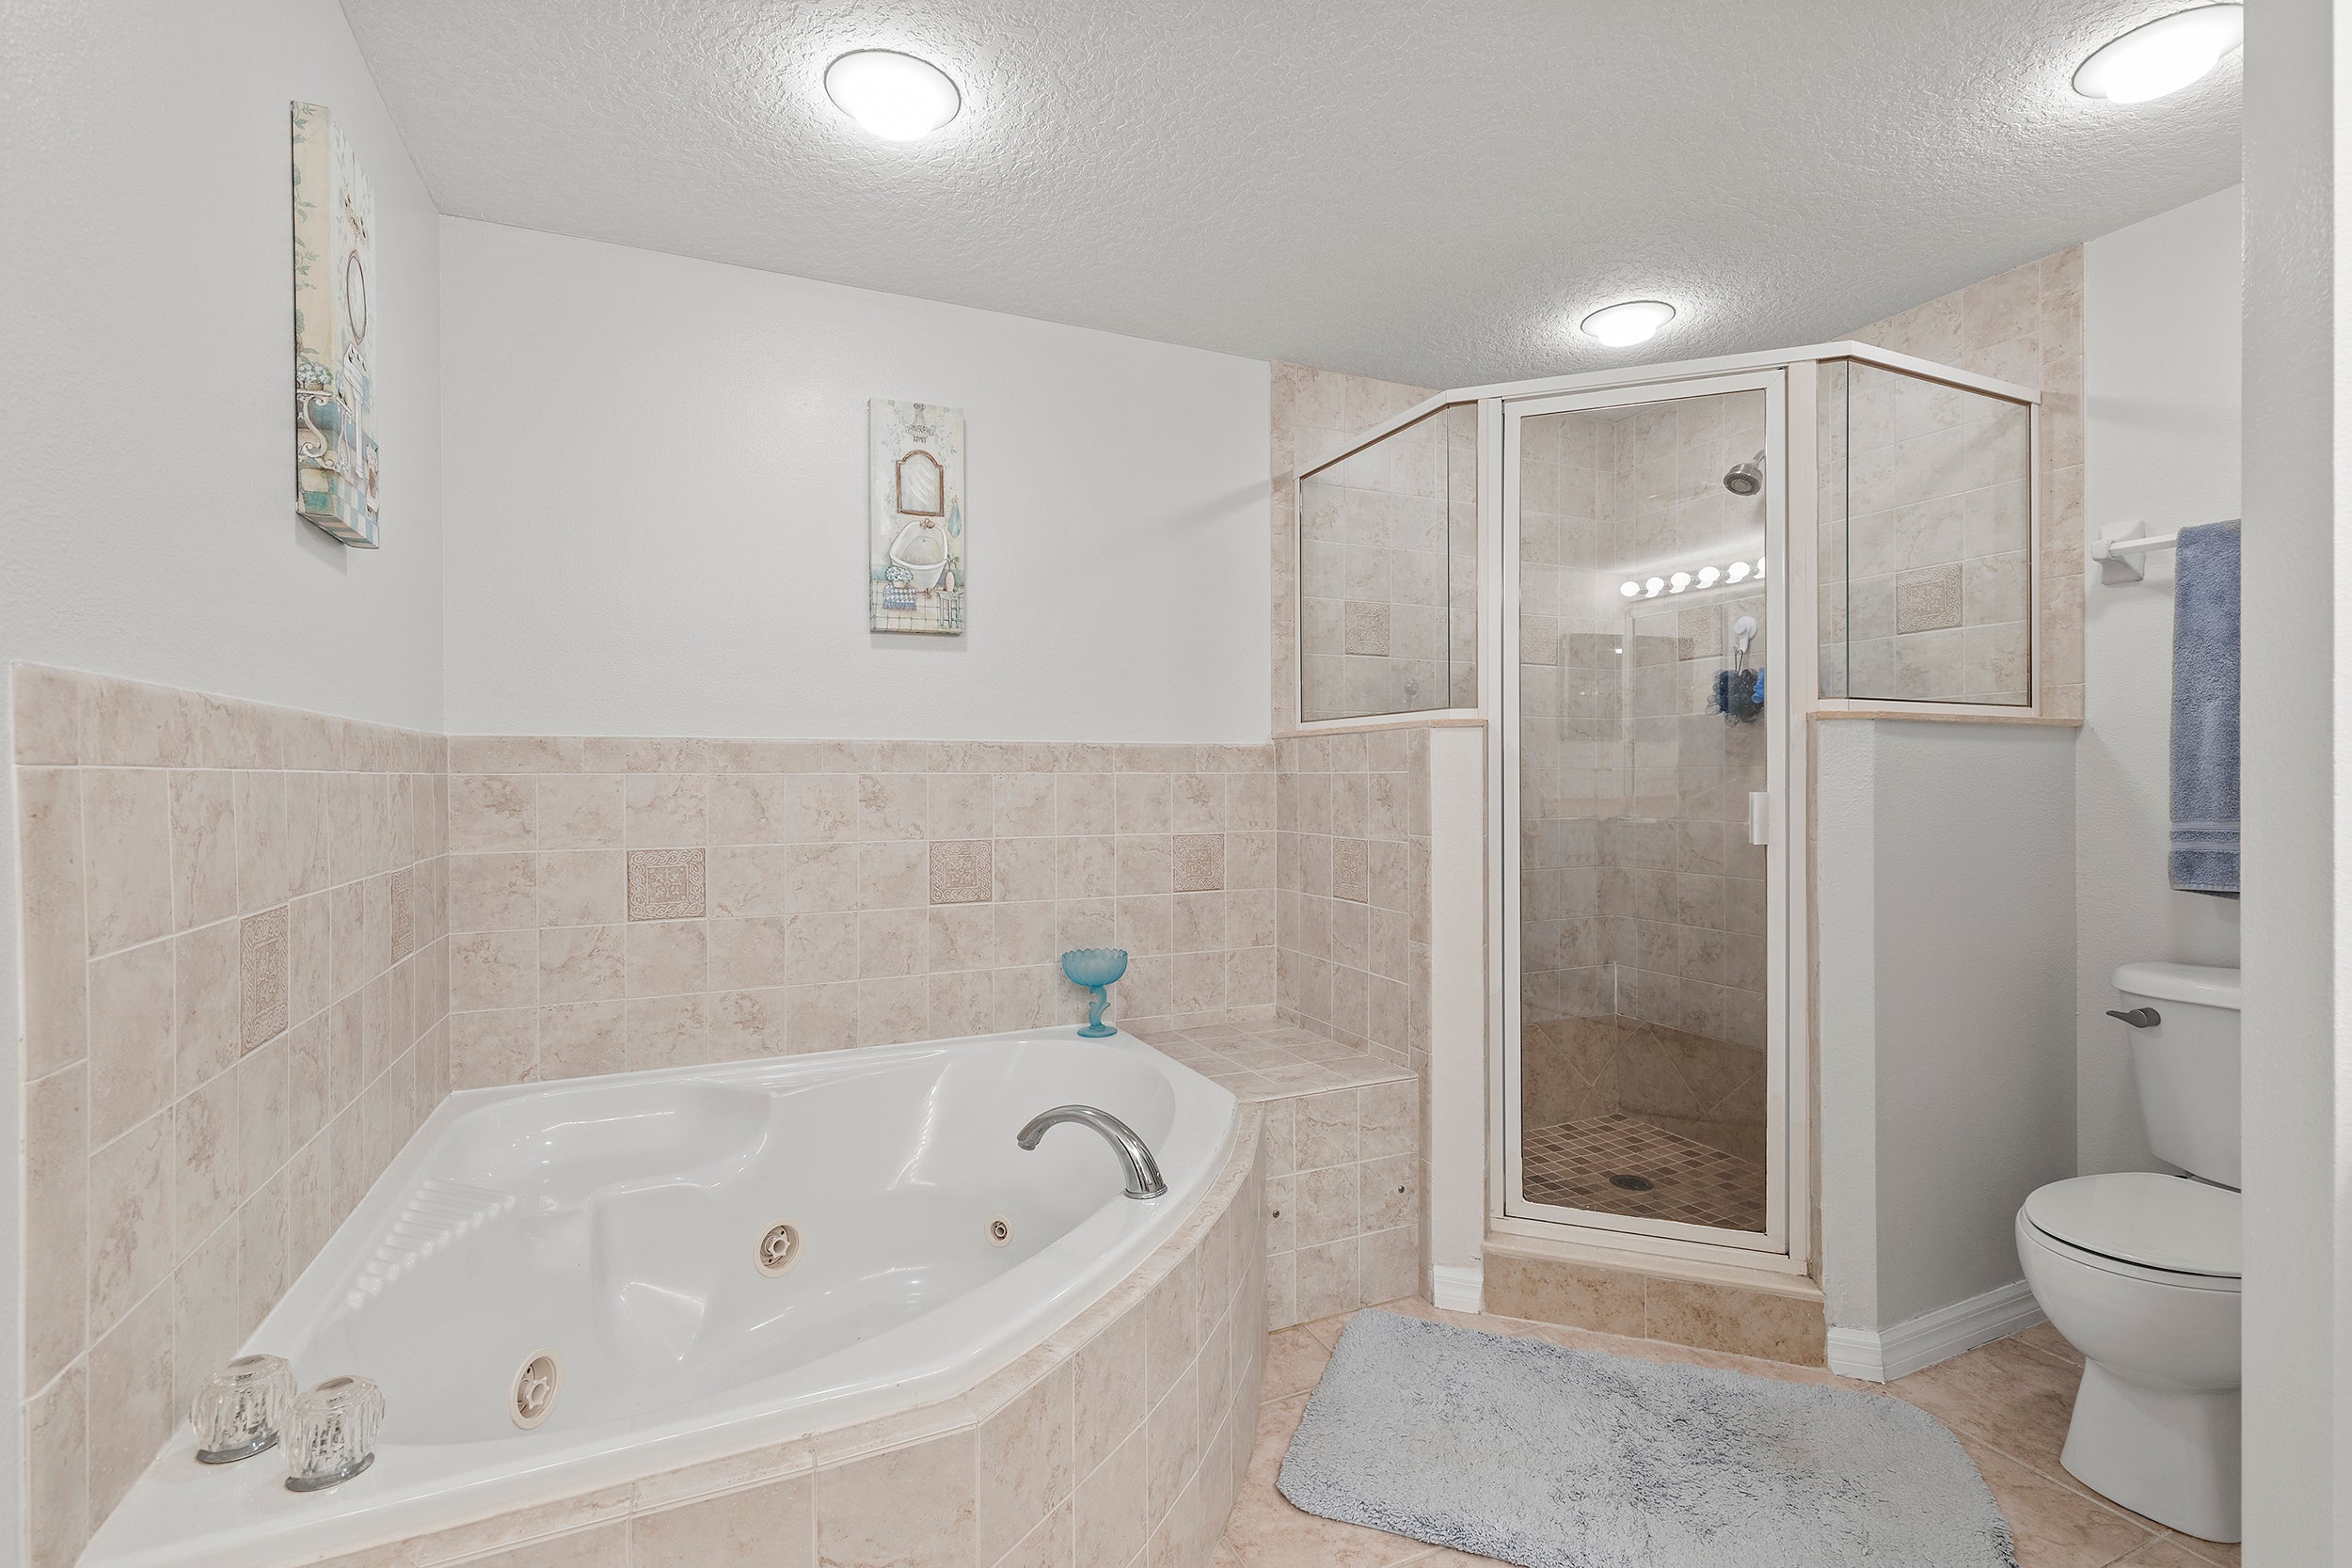 Primary Bathroom with Standup Shower and Jetted Tub